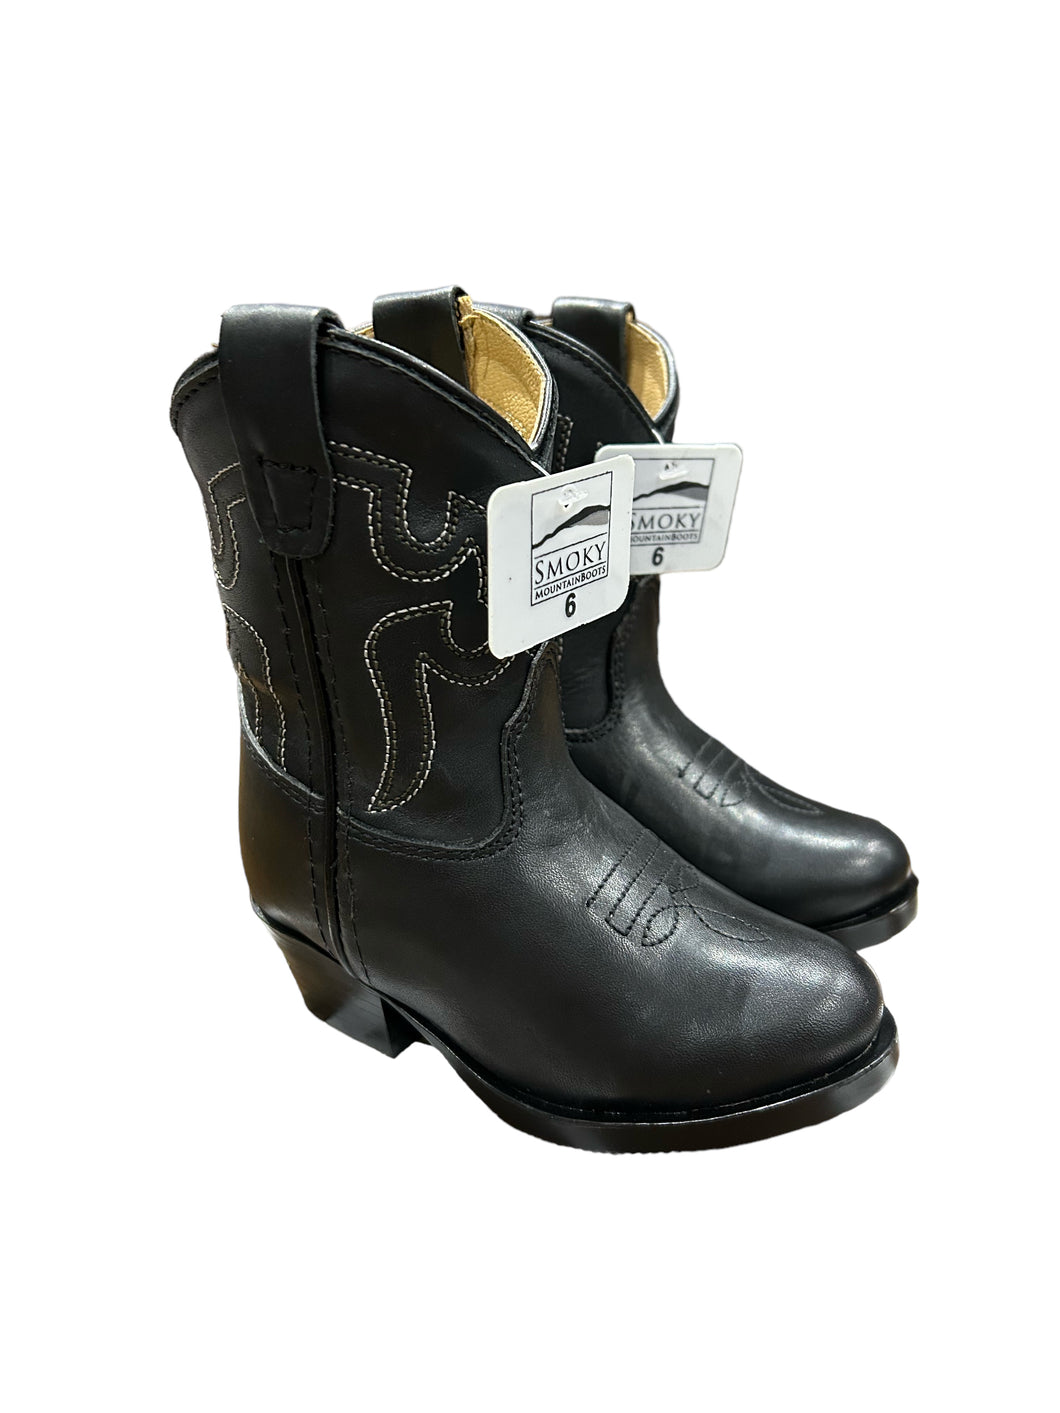 Smoky Mountain Boots 3032T Denver Black Western Toddler Boots